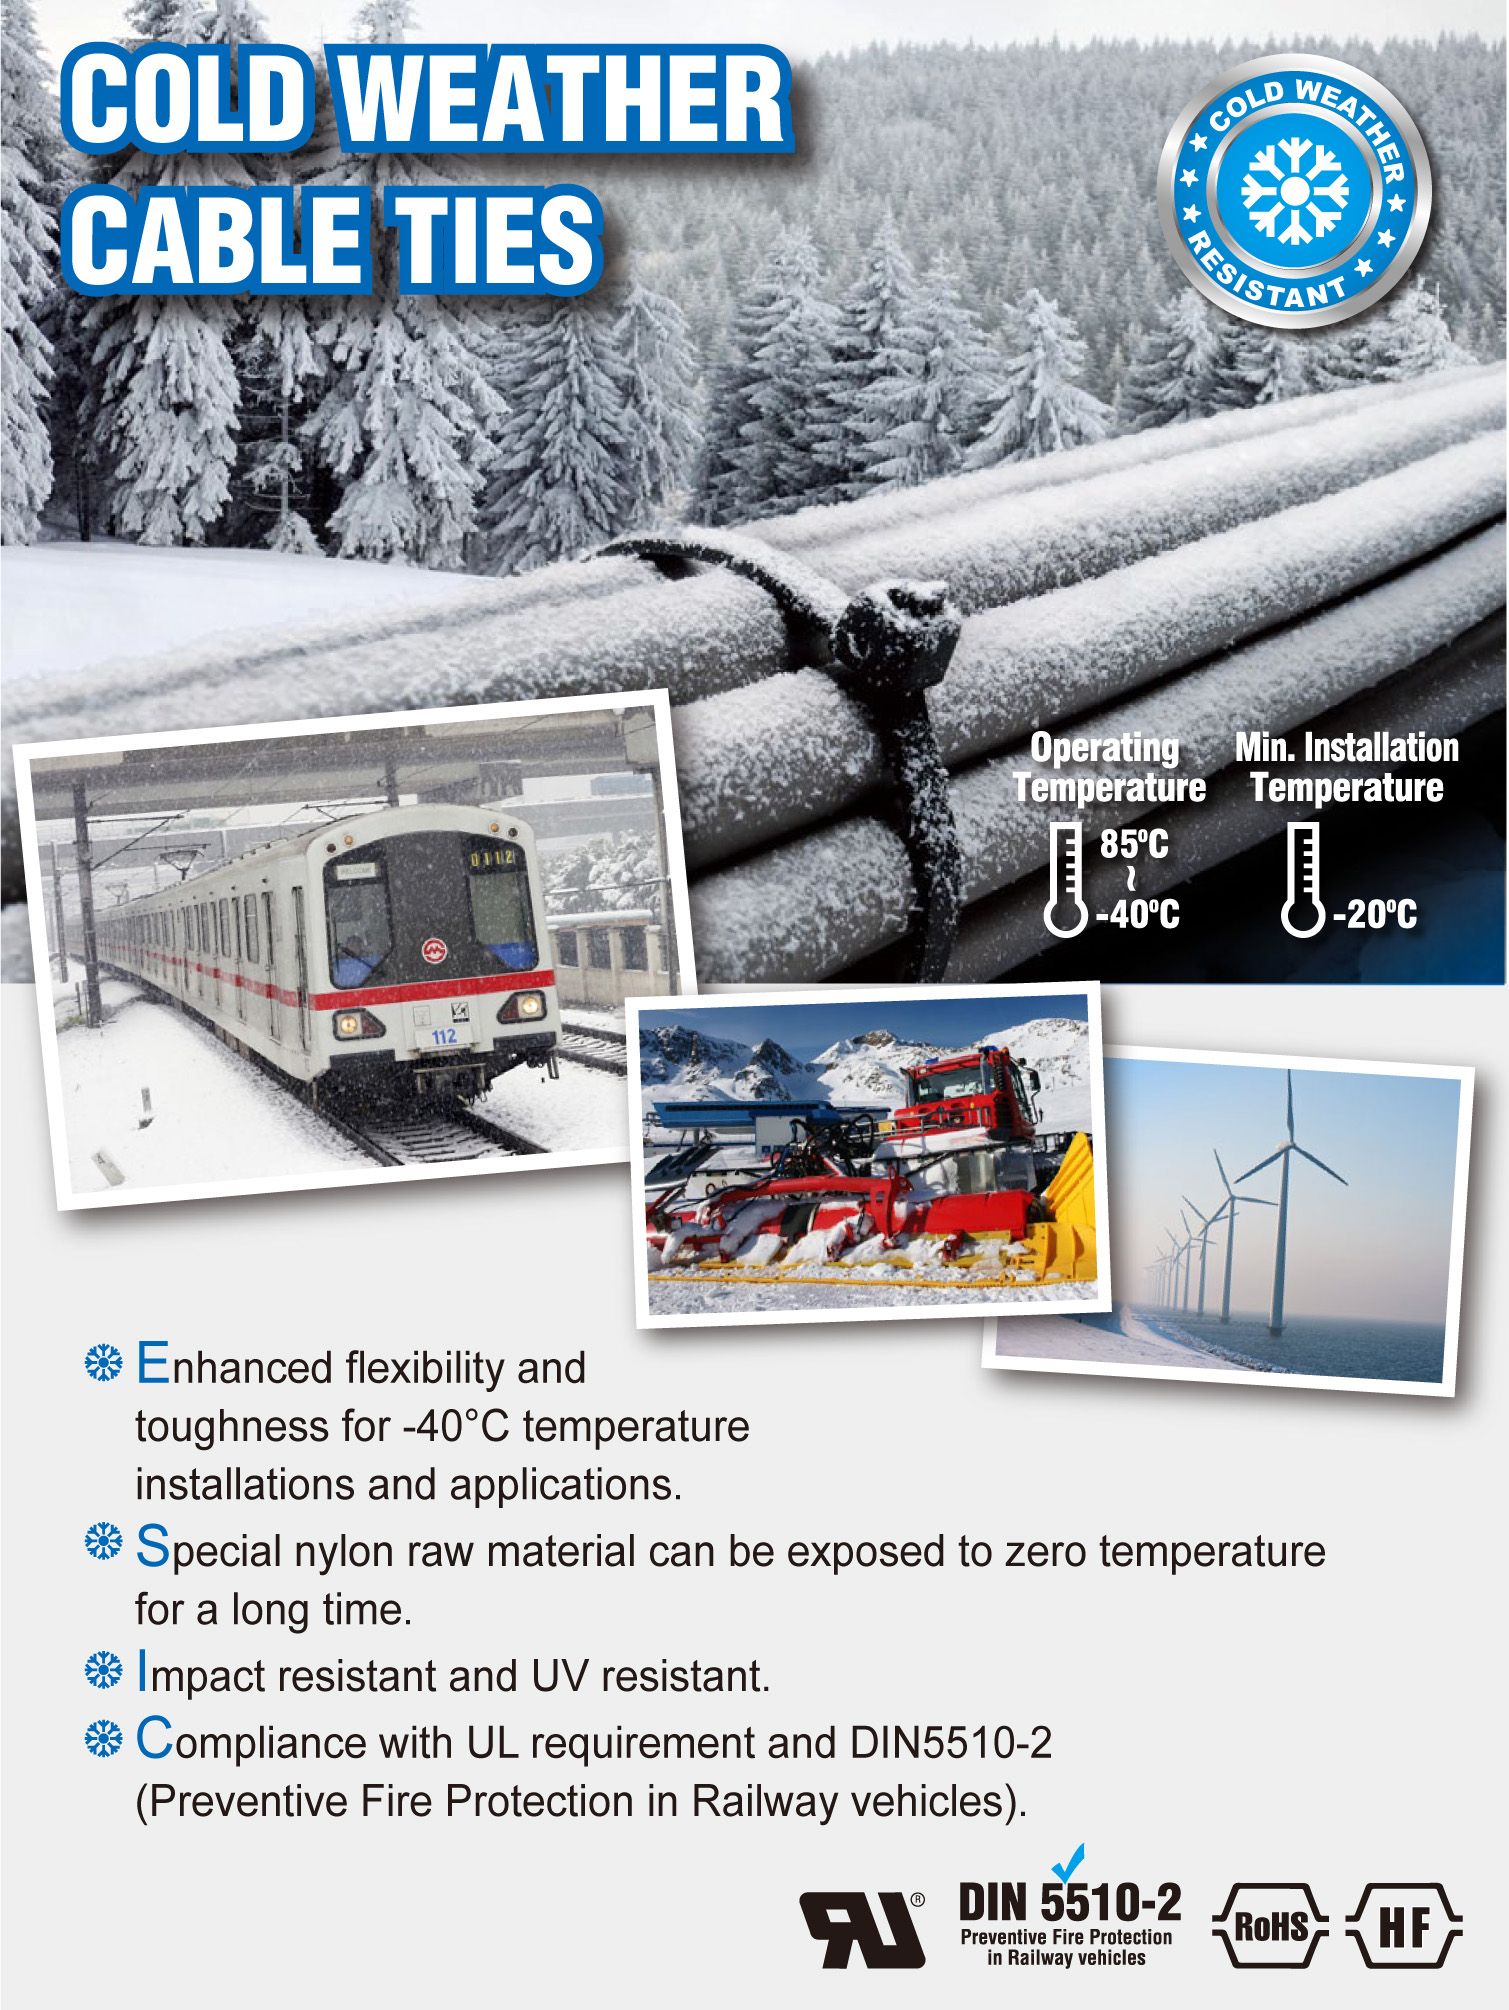 Features and Applications of Cold Weather Cable Ties